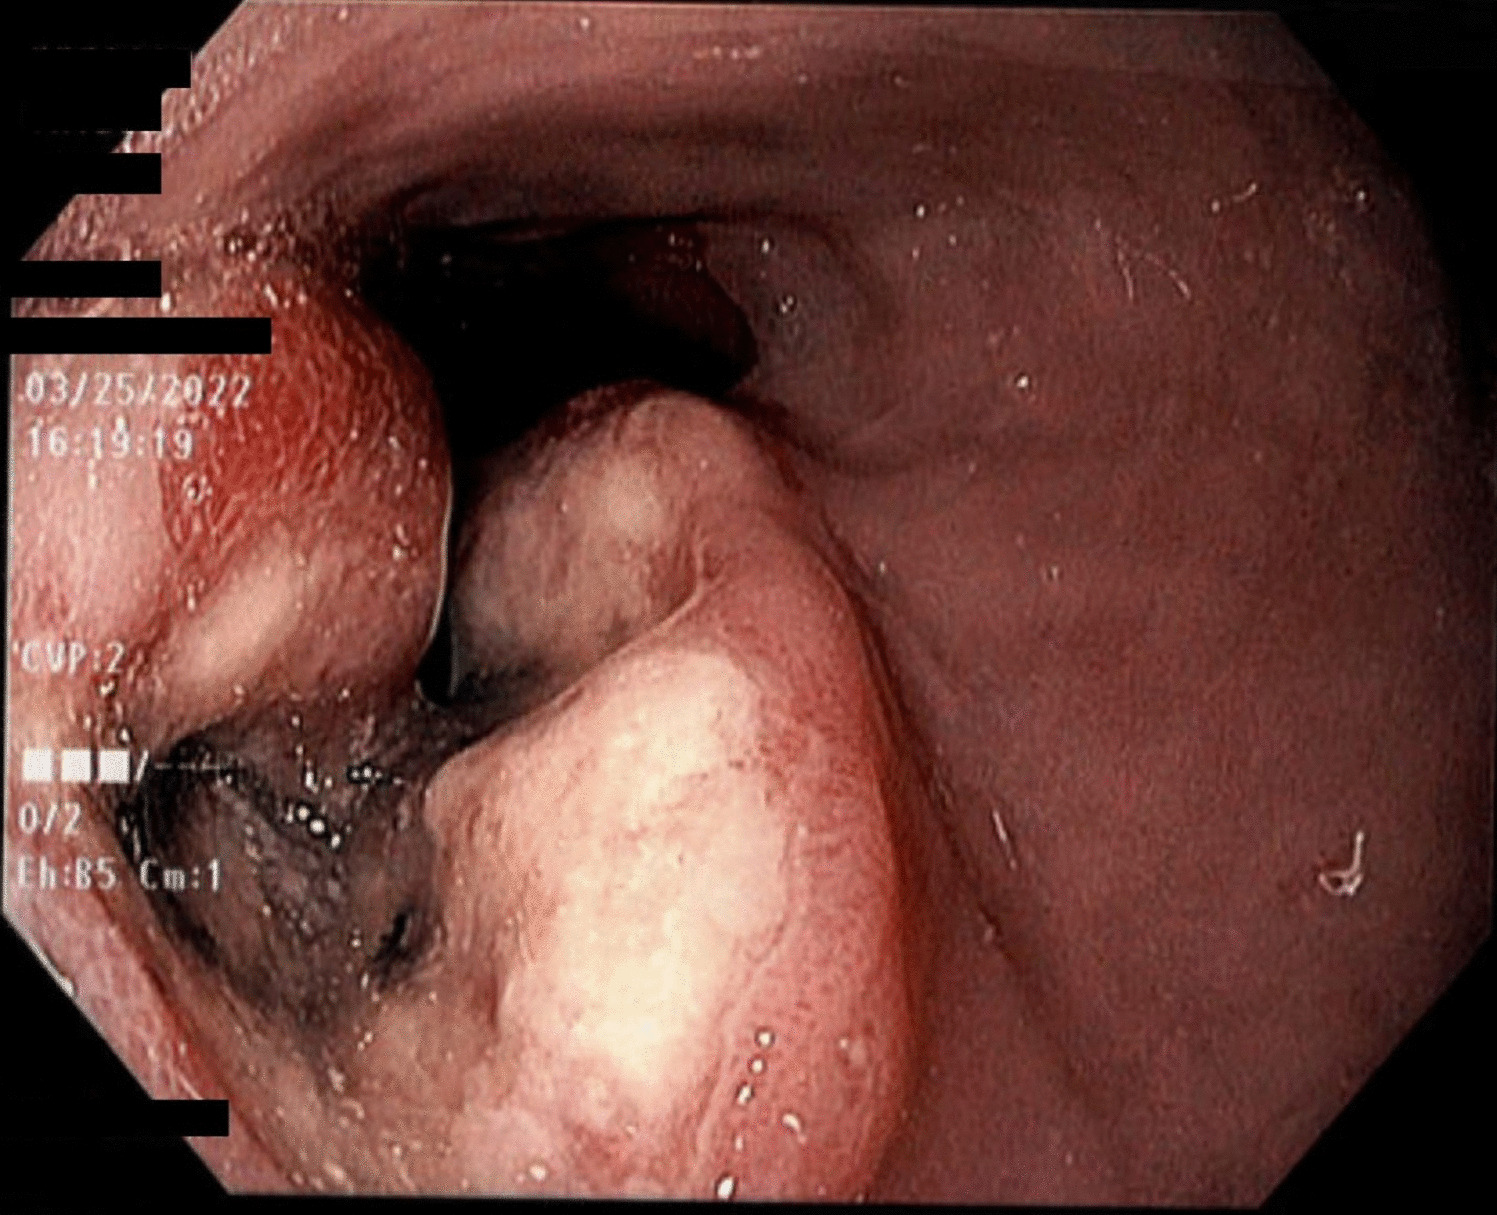 SMARCA4-Deficient Undifferentiated Esophageal Carcinoma: A Clinical Case Series and Literature Review